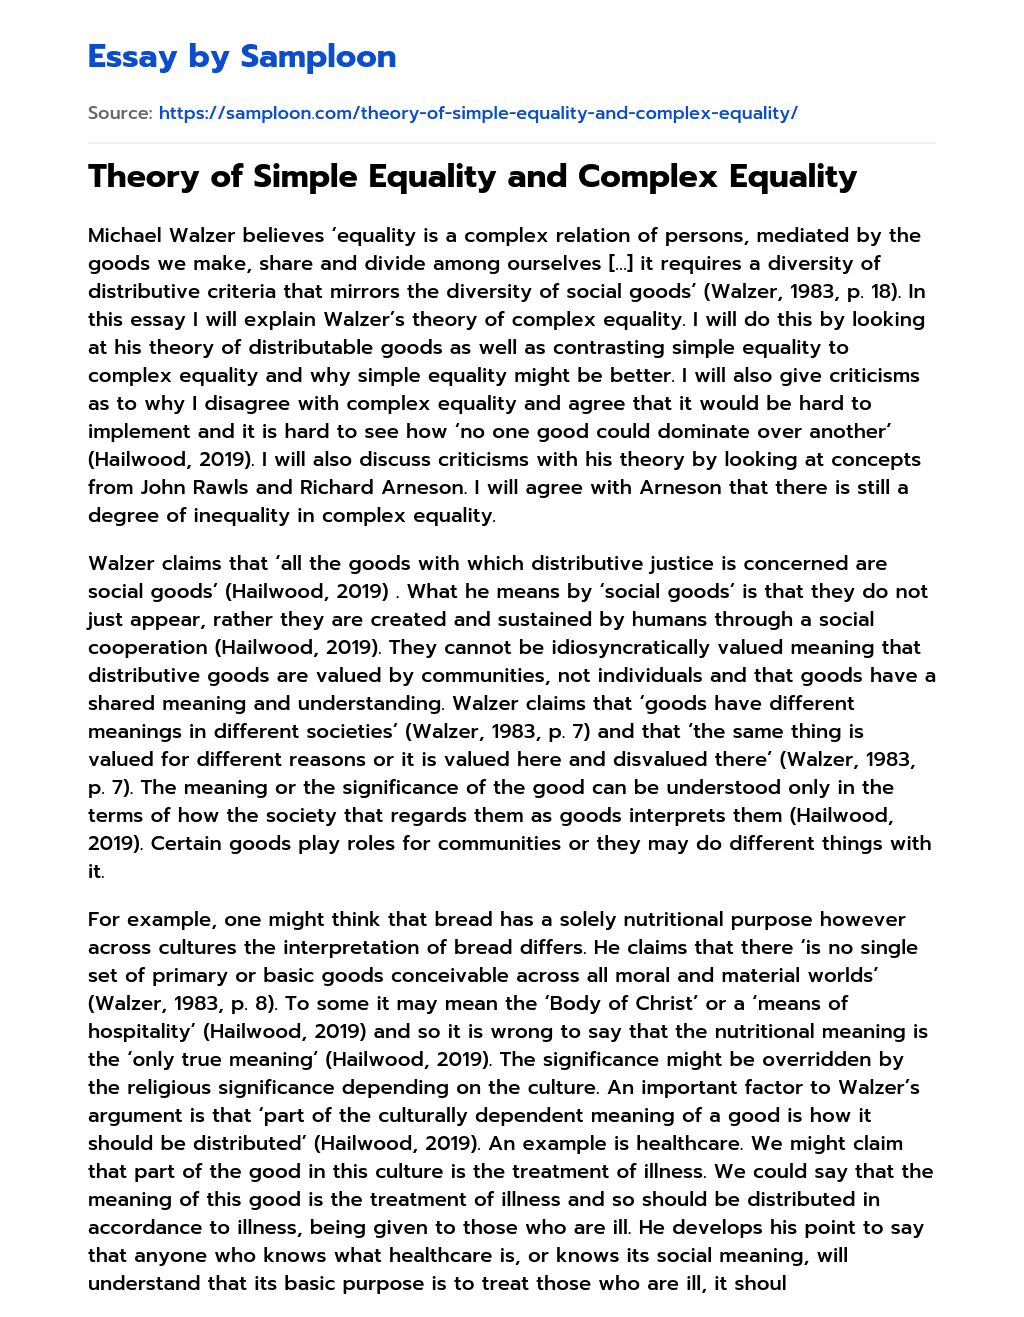 Theory of Simple Equality and Complex Equality essay